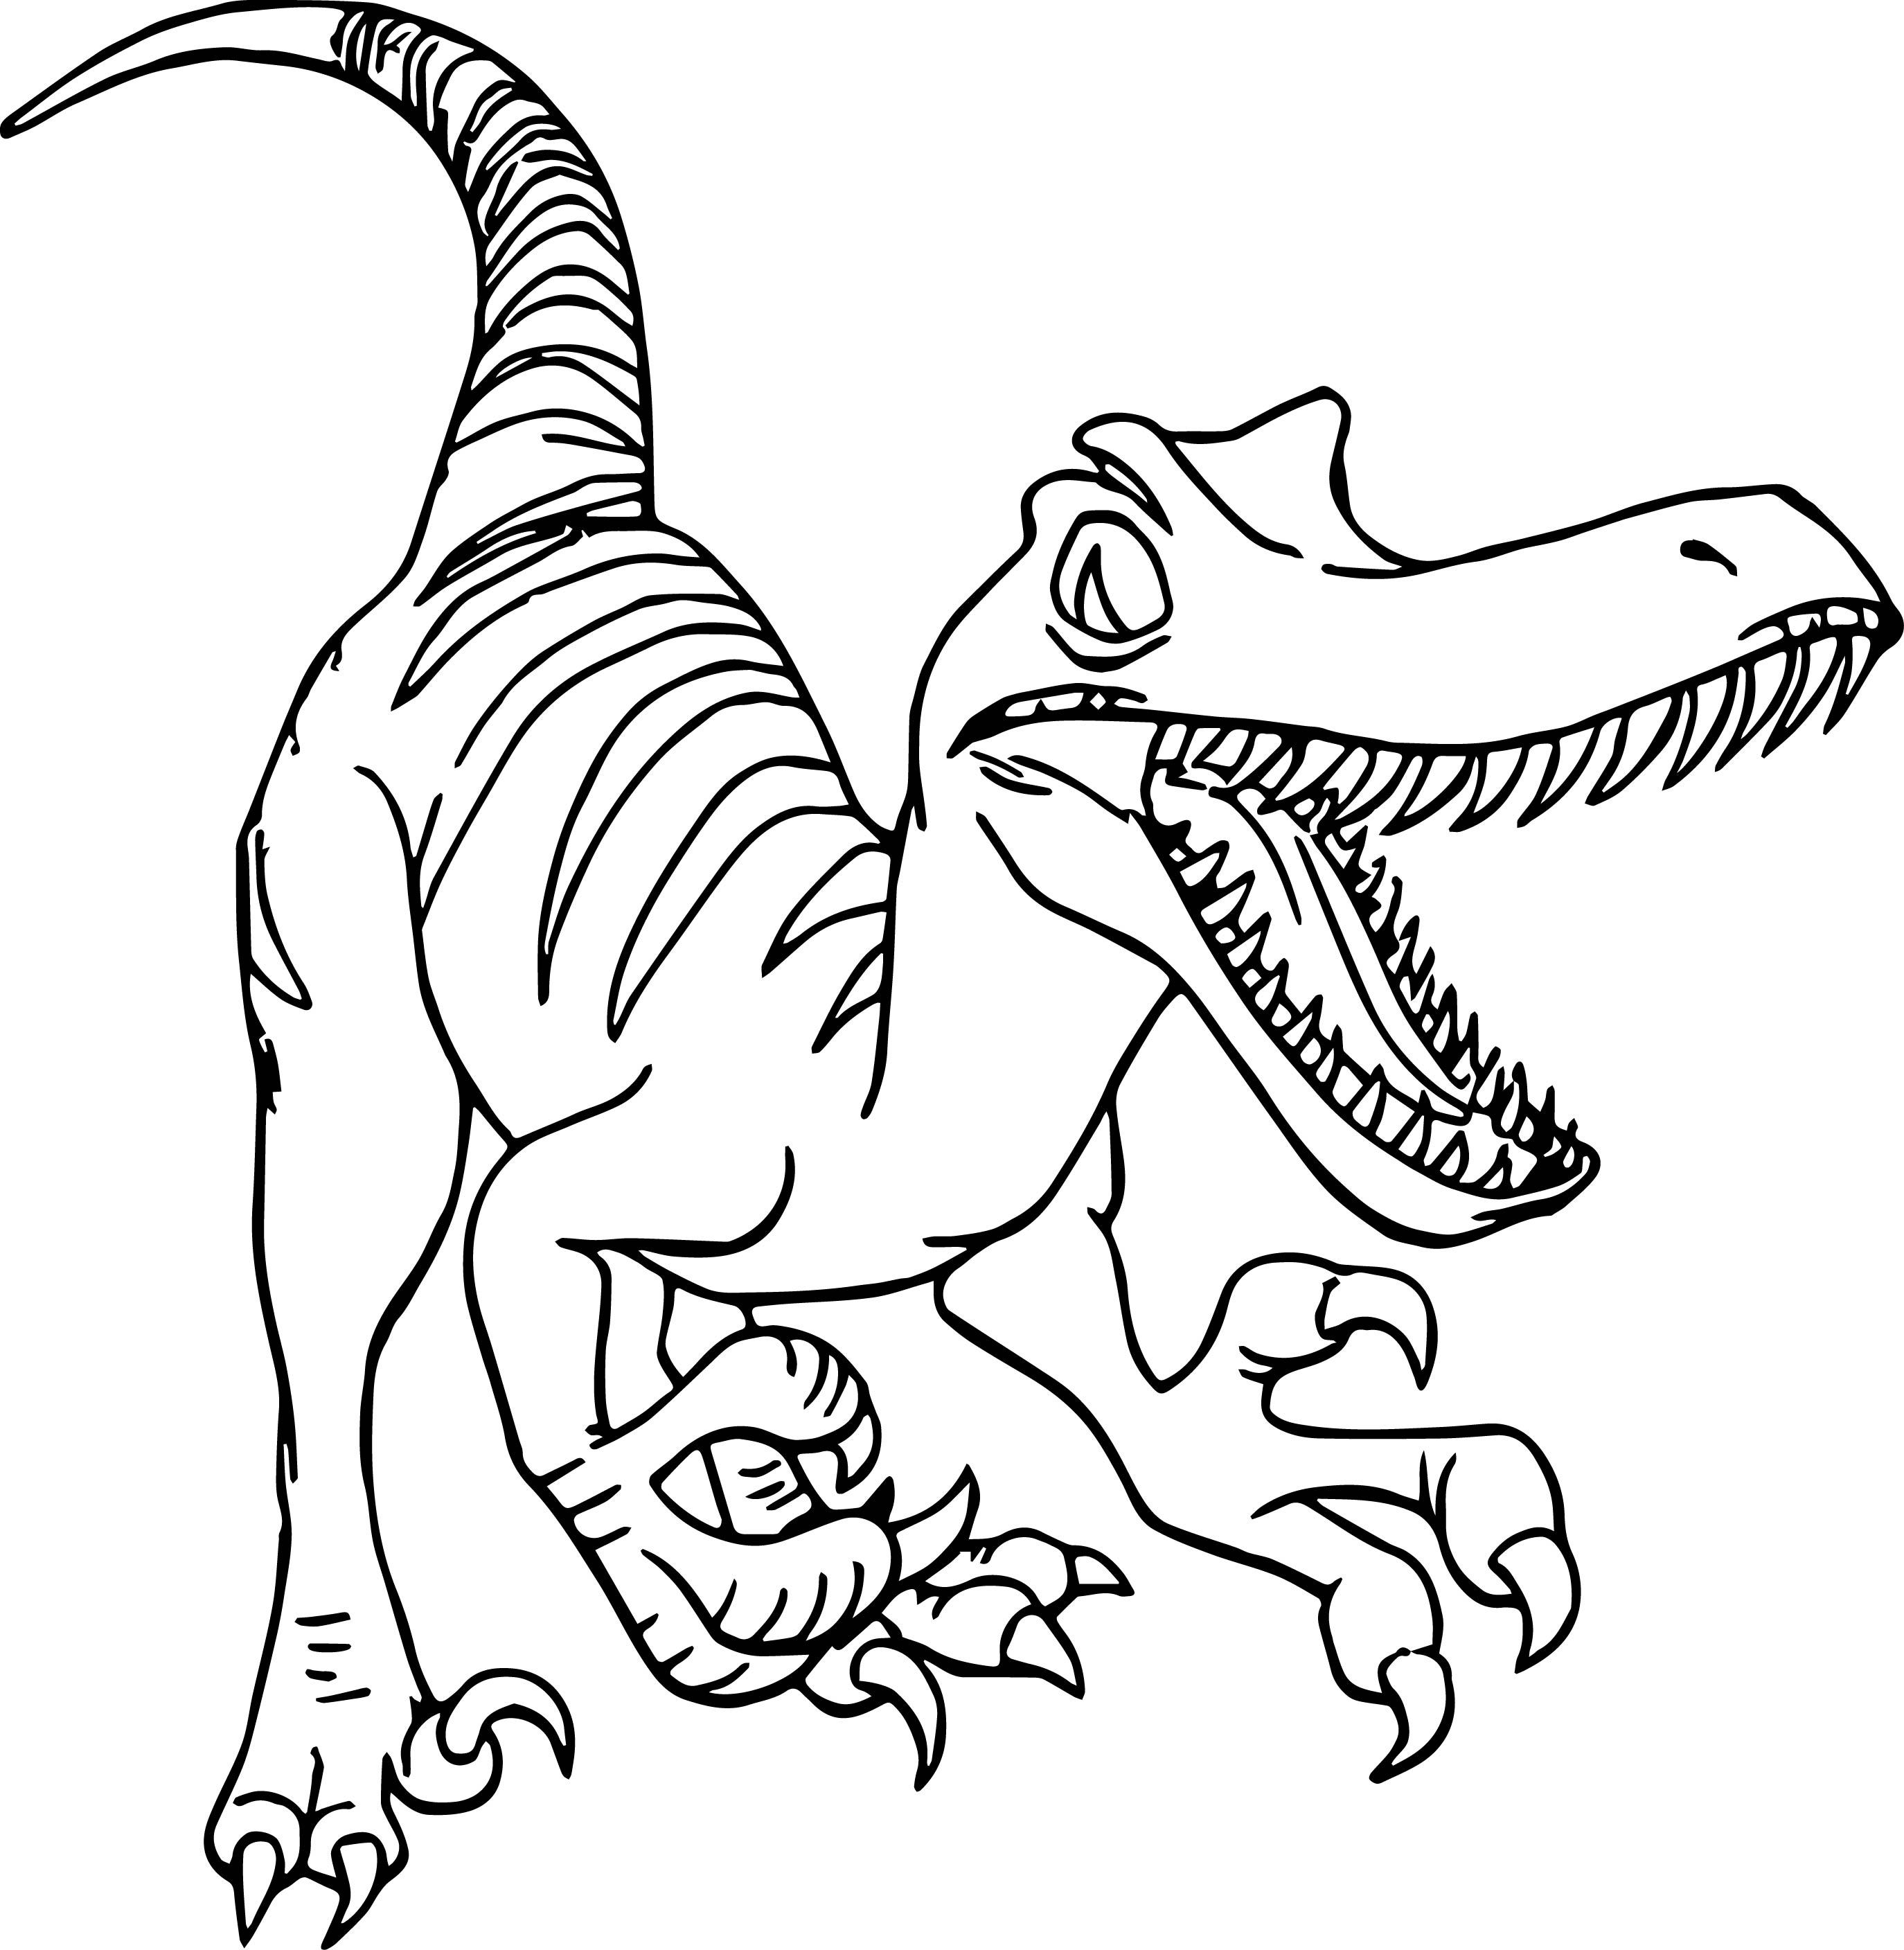 Velociraptor Printable Coloring Pages at Free